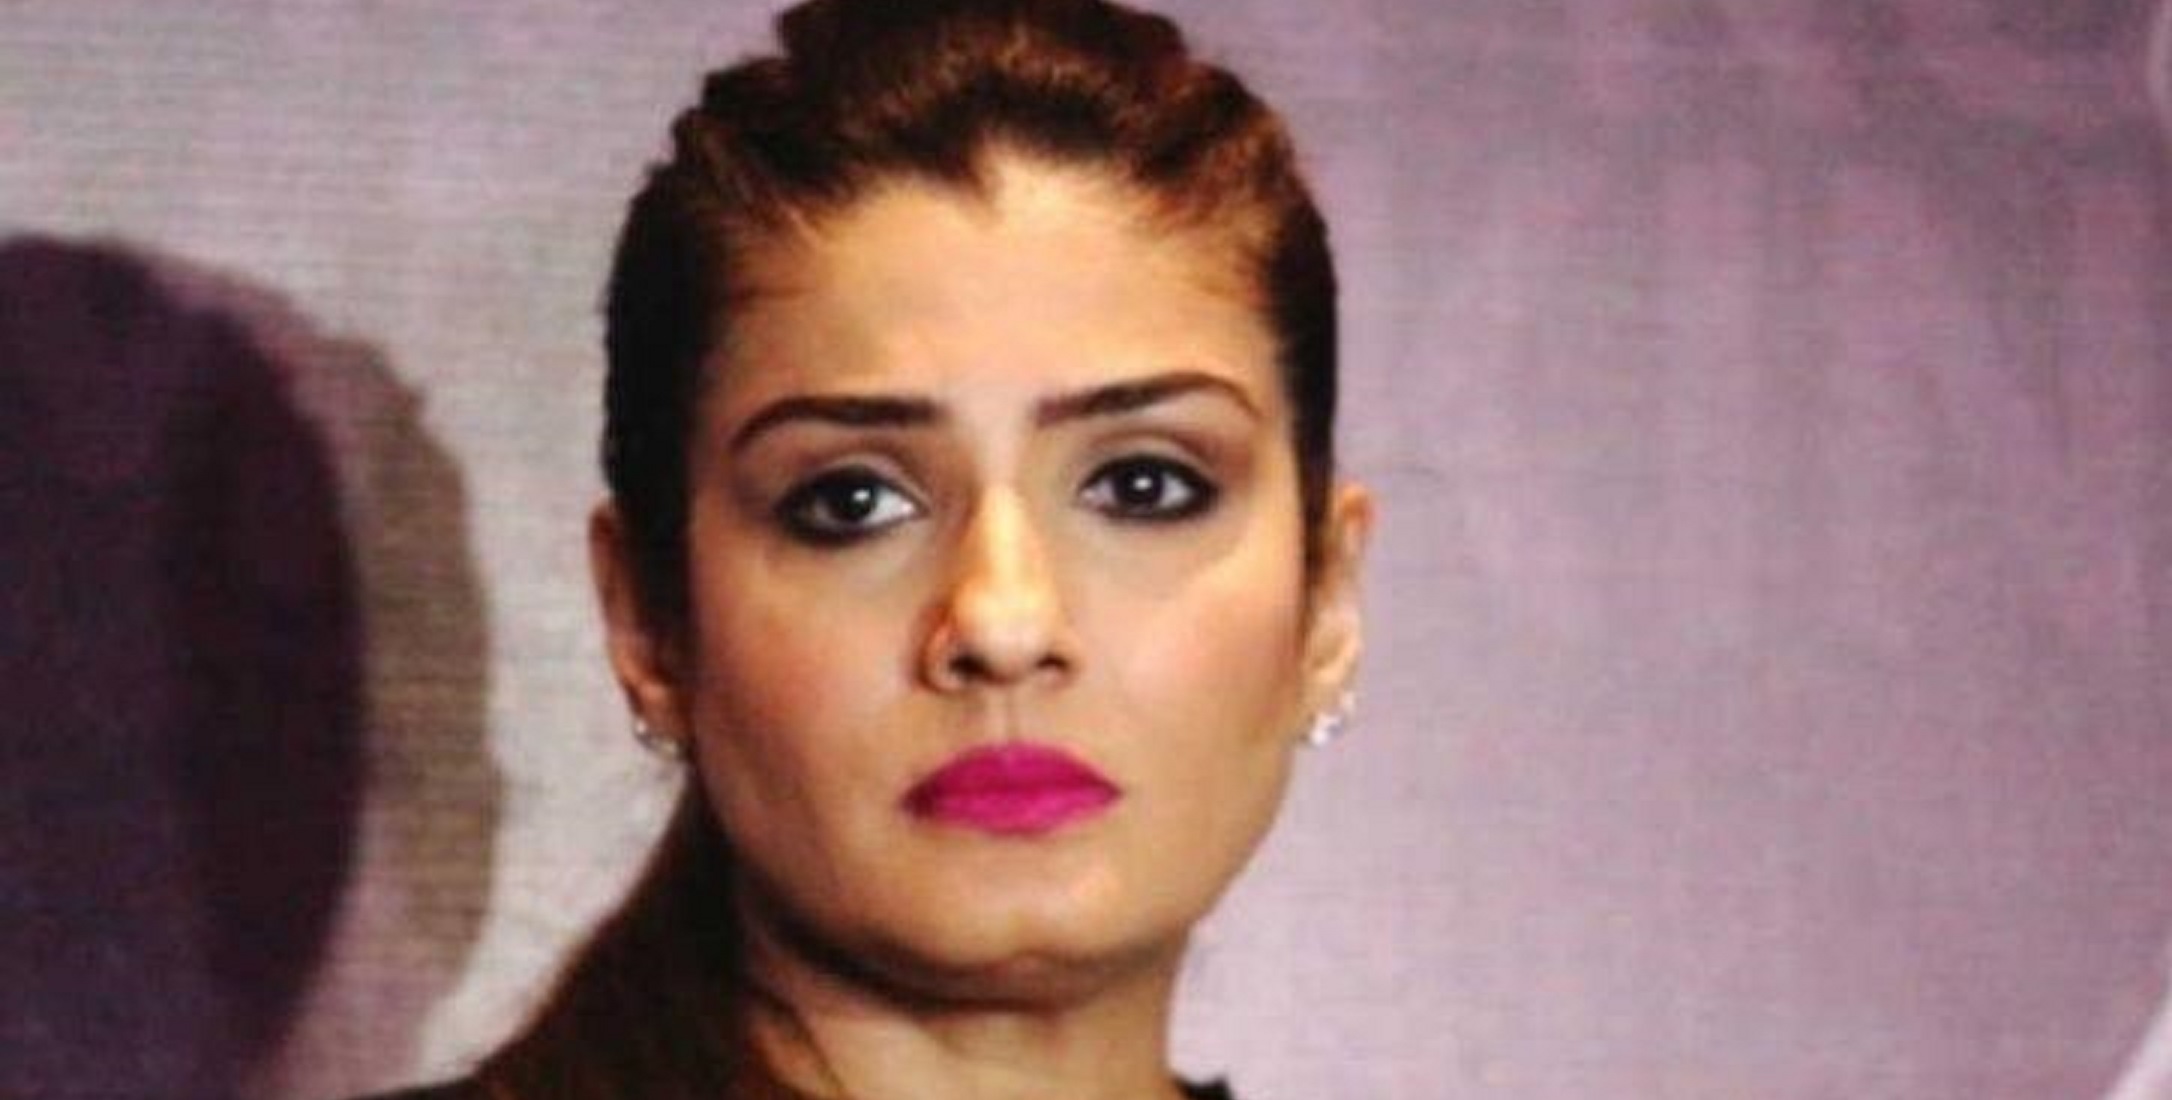 Raveena Tandon Talks About ‘Dirty Politics’ Of Bollywood, Says “Old Wounds Are Revisited”